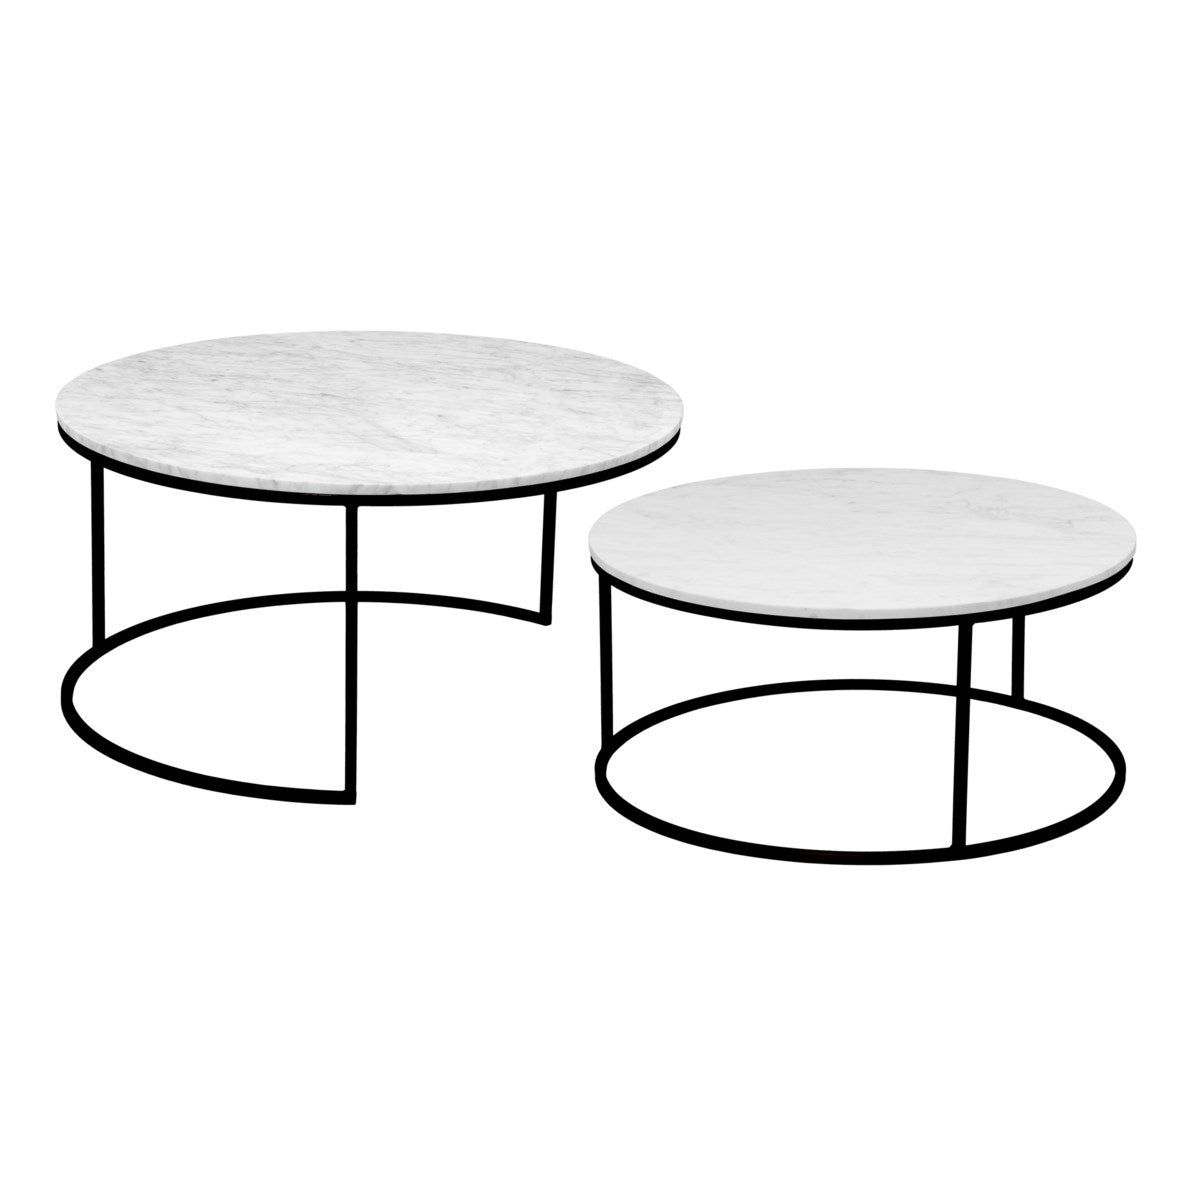 Averie Black Steel and Marble Top Nesting Coffee Tables (Set of 2)